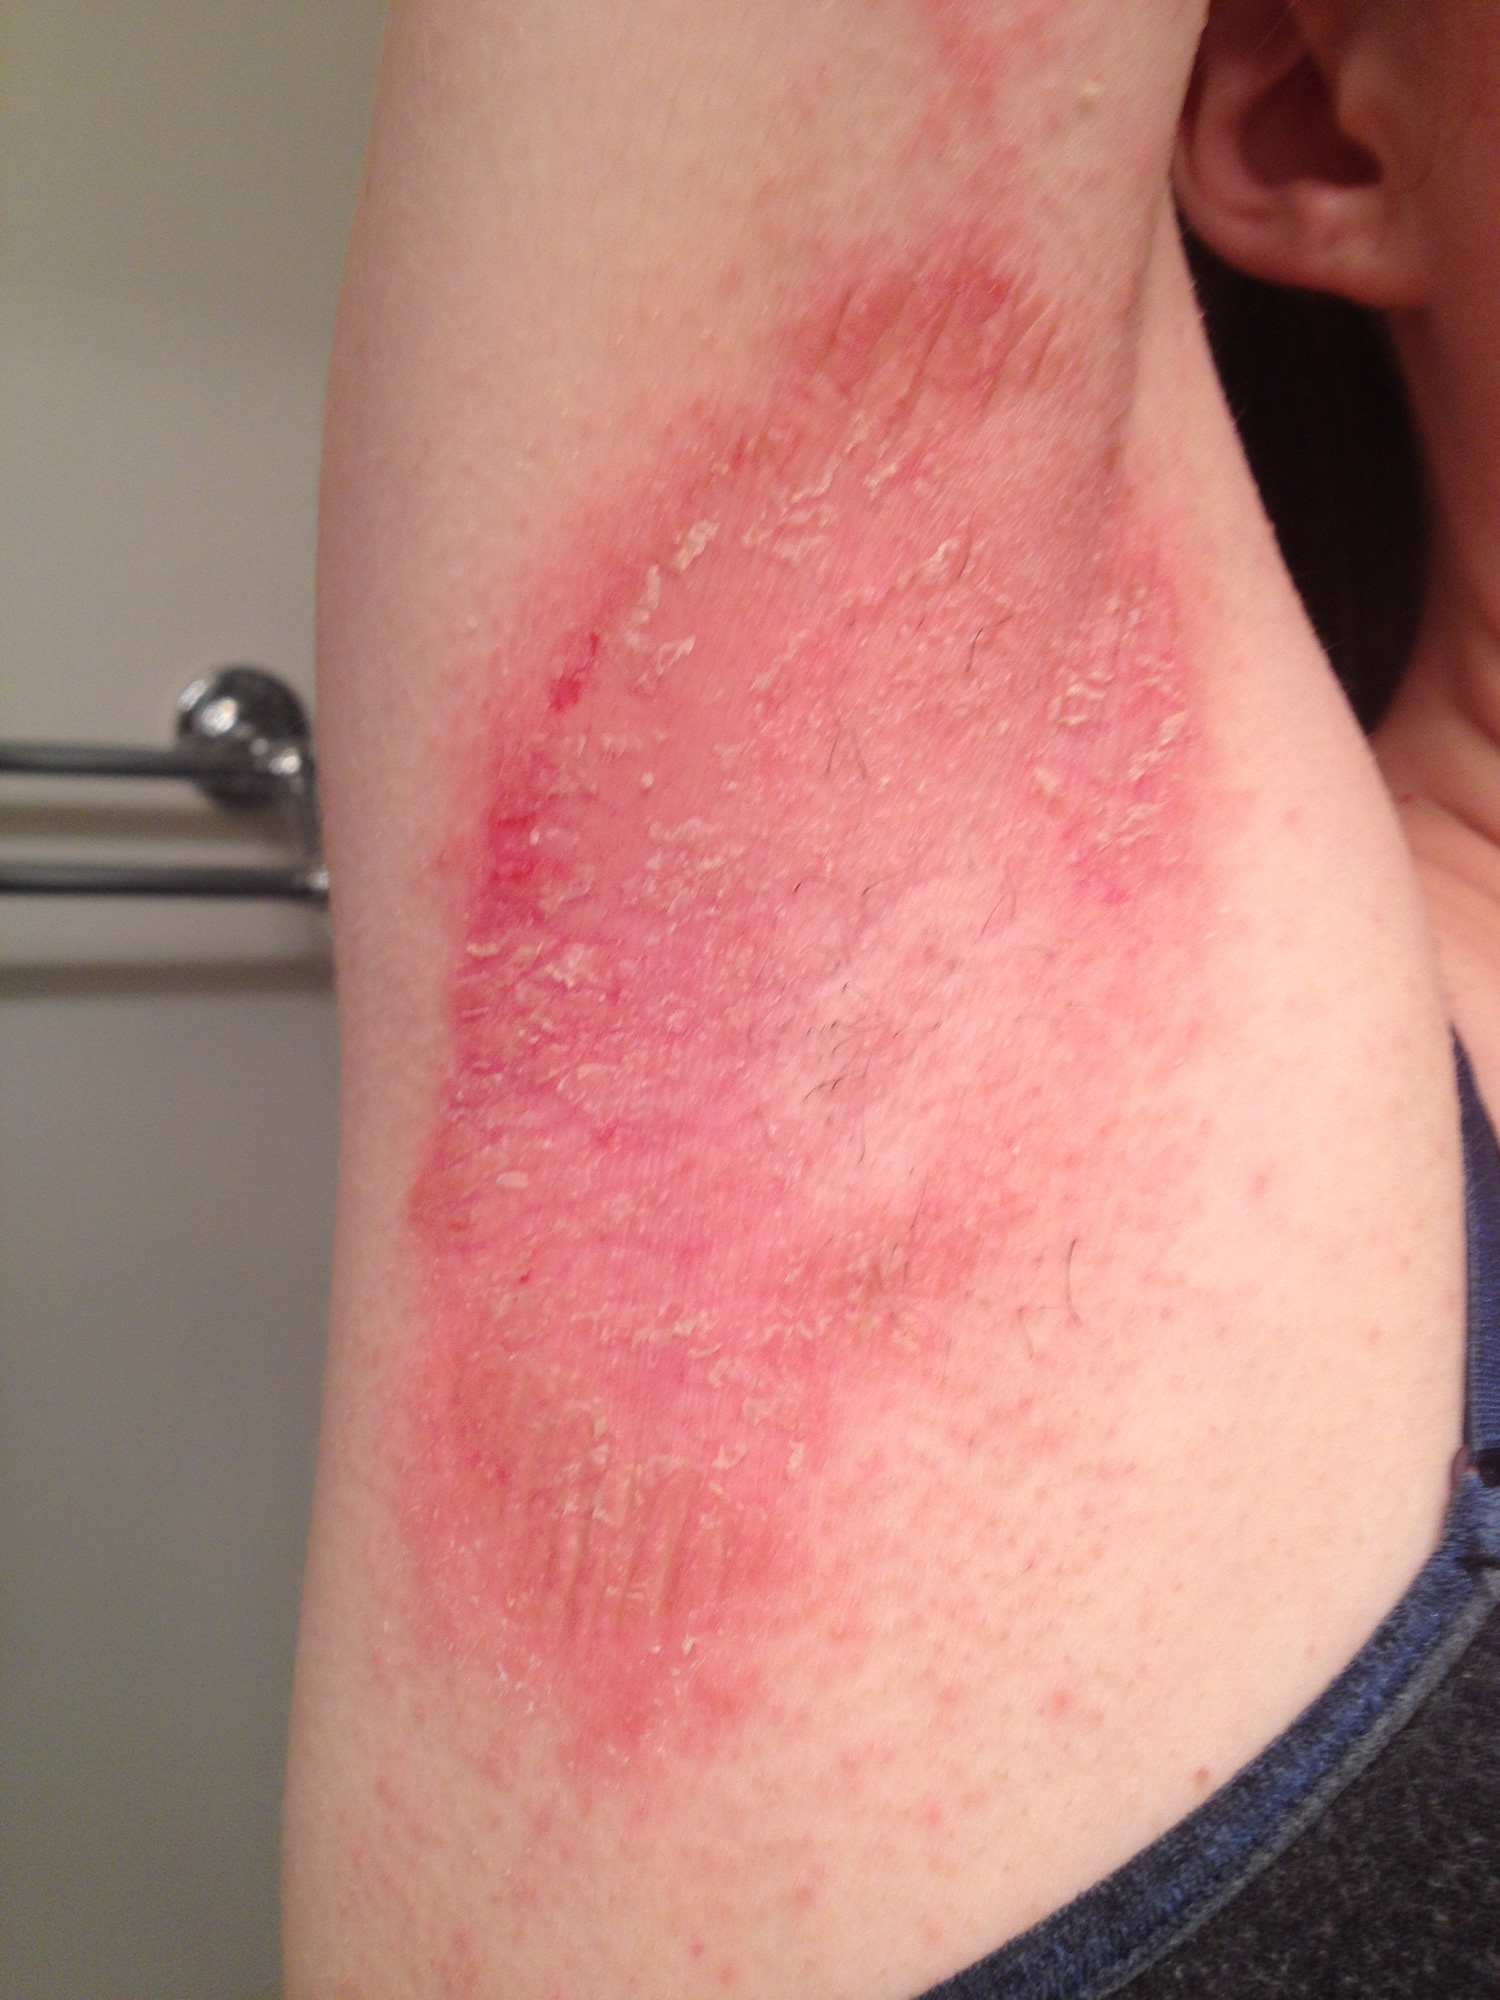 red-itchy-rash-on-arms